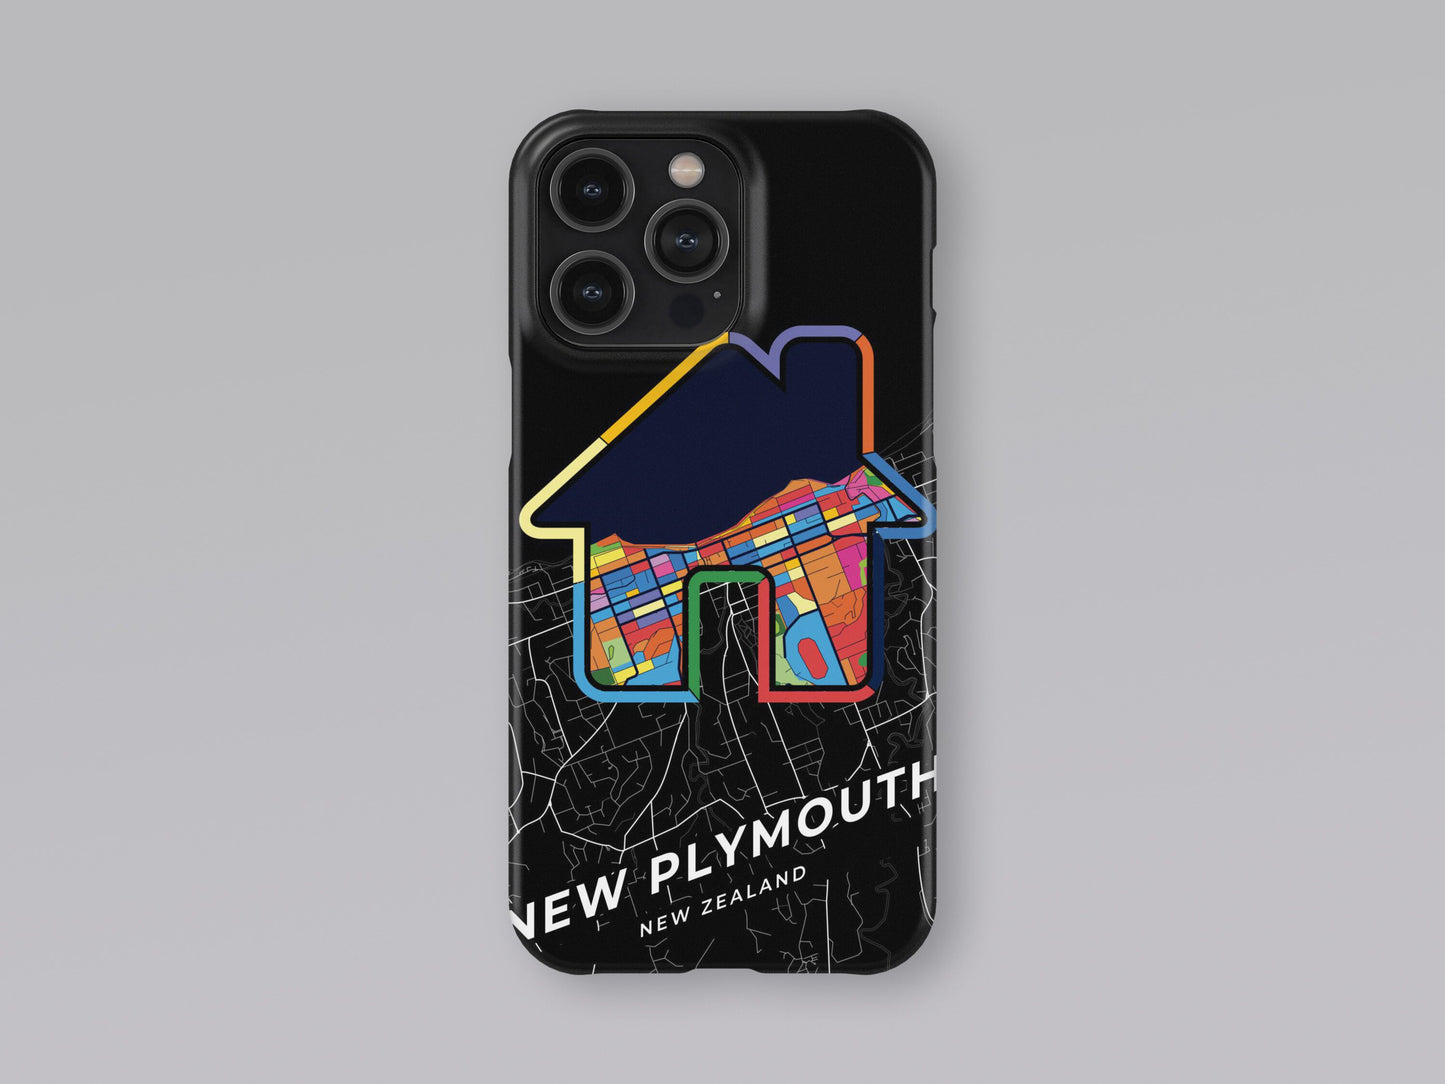 New Plymouth New Zealand slim phone case with colorful icon 3